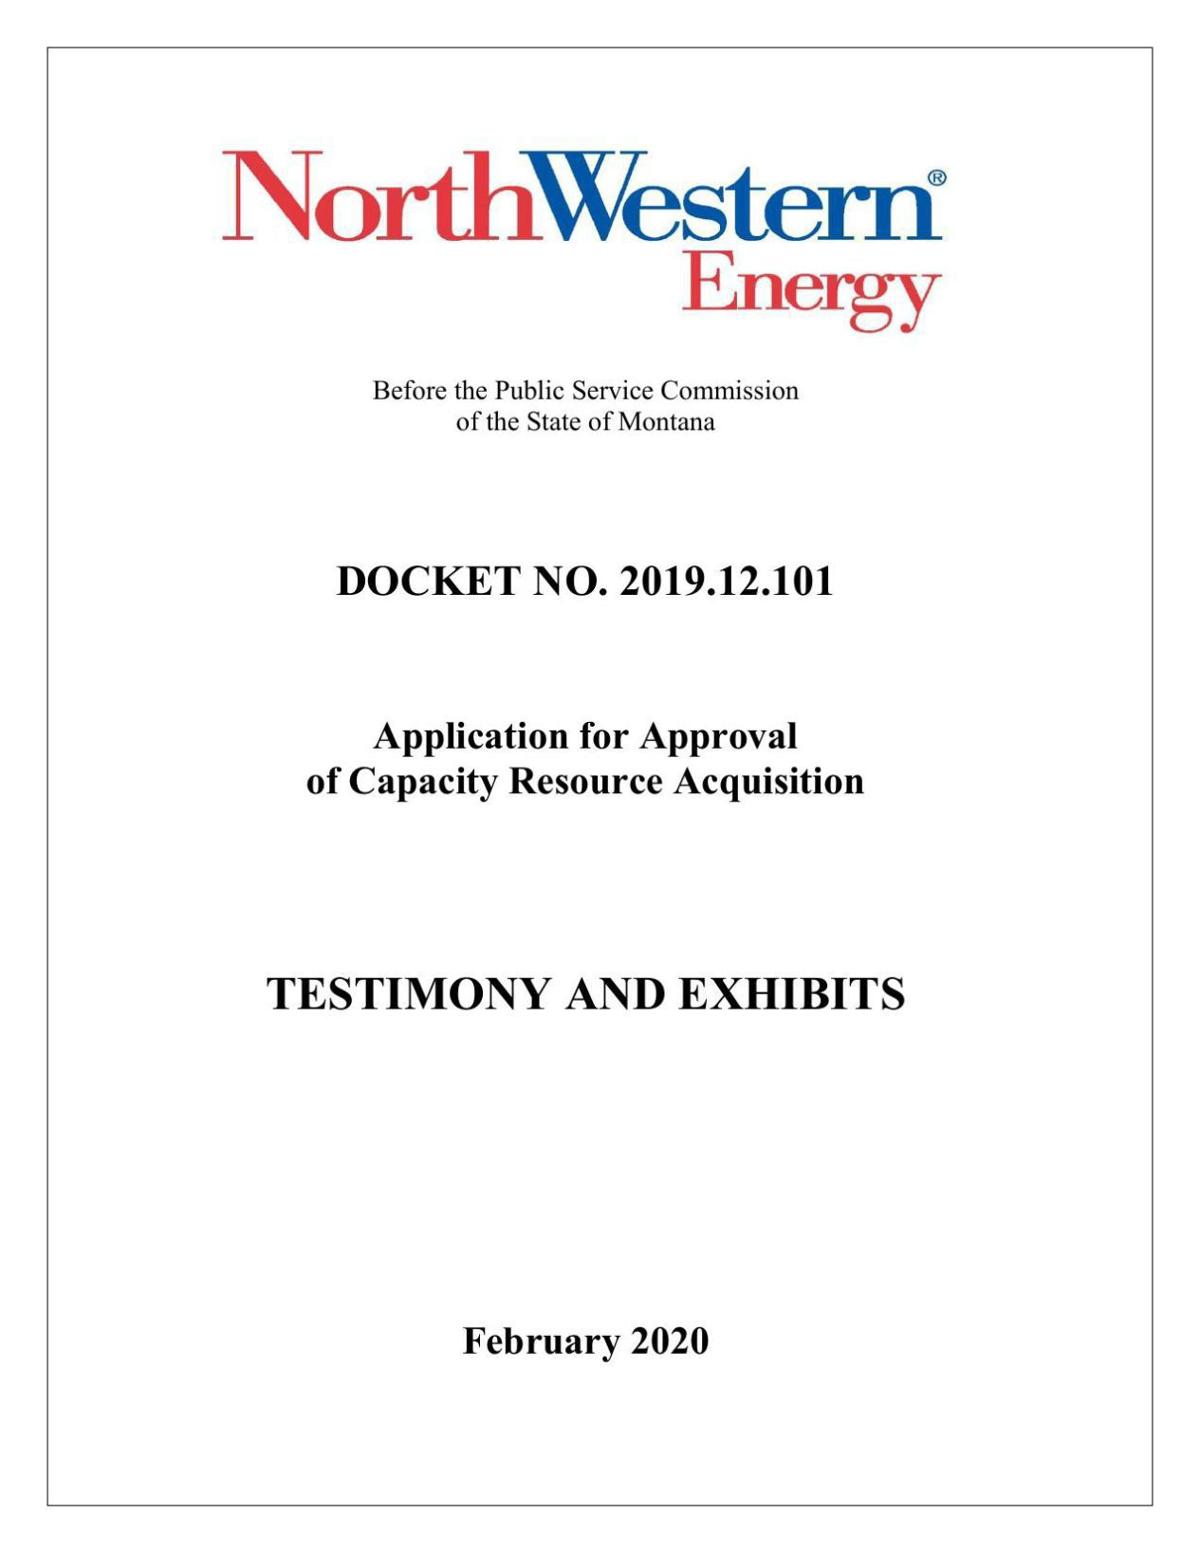 e-filed NorthWestern Energy's Testimony and Exhibits: Application for Approval of Capacity Resource Acquisition